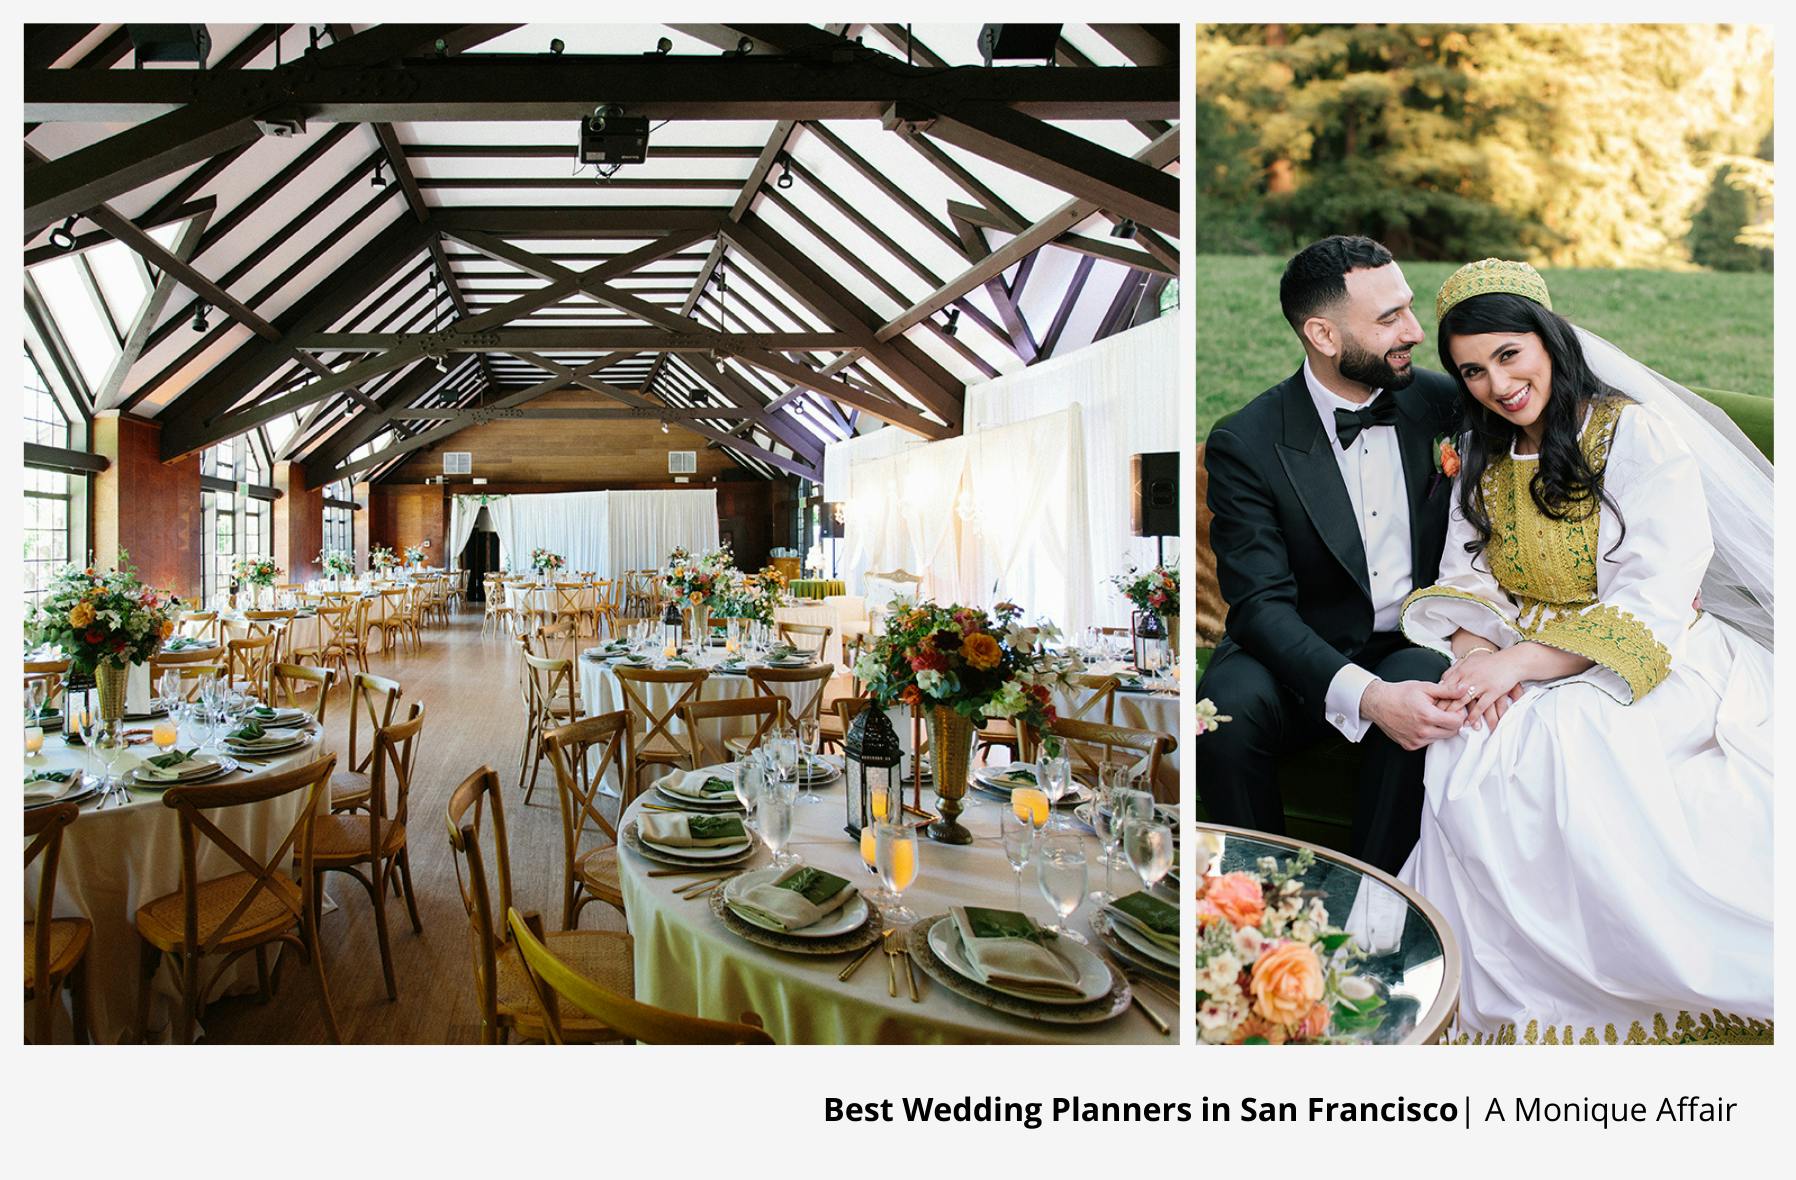 Planning an Outdoor Spring Wedding? — Tobacco Ranch